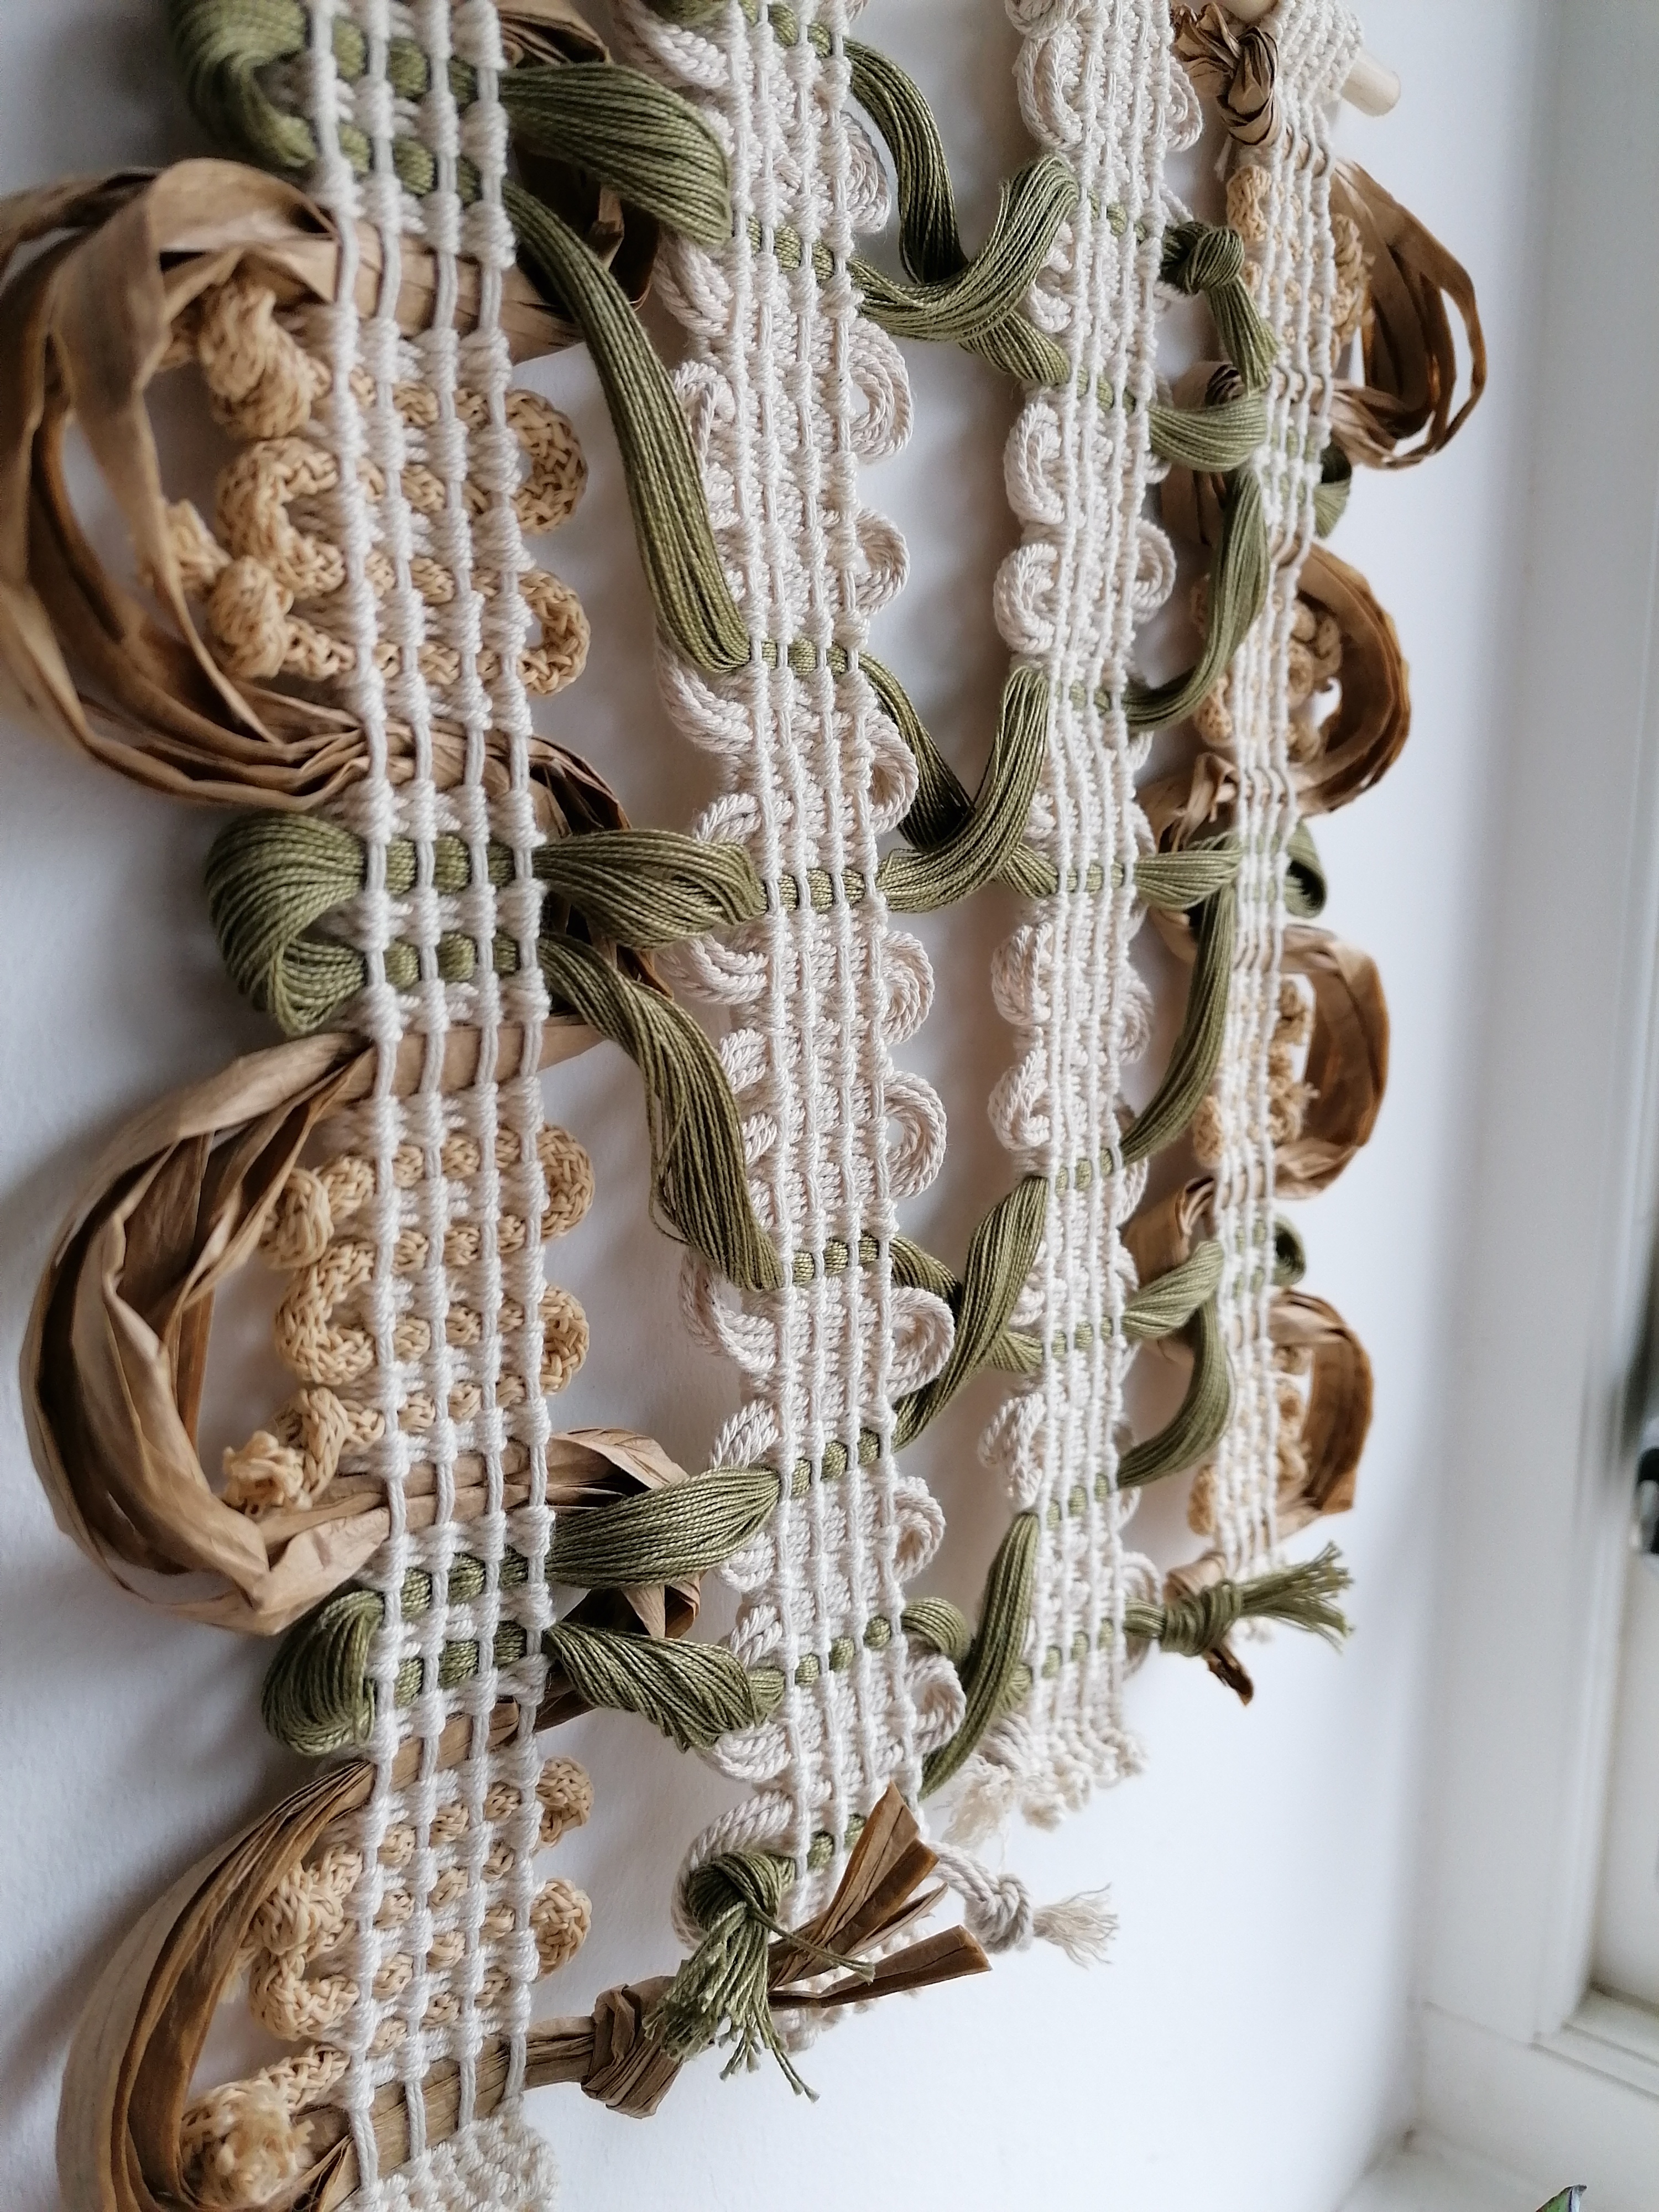 Olive wall hanging detail